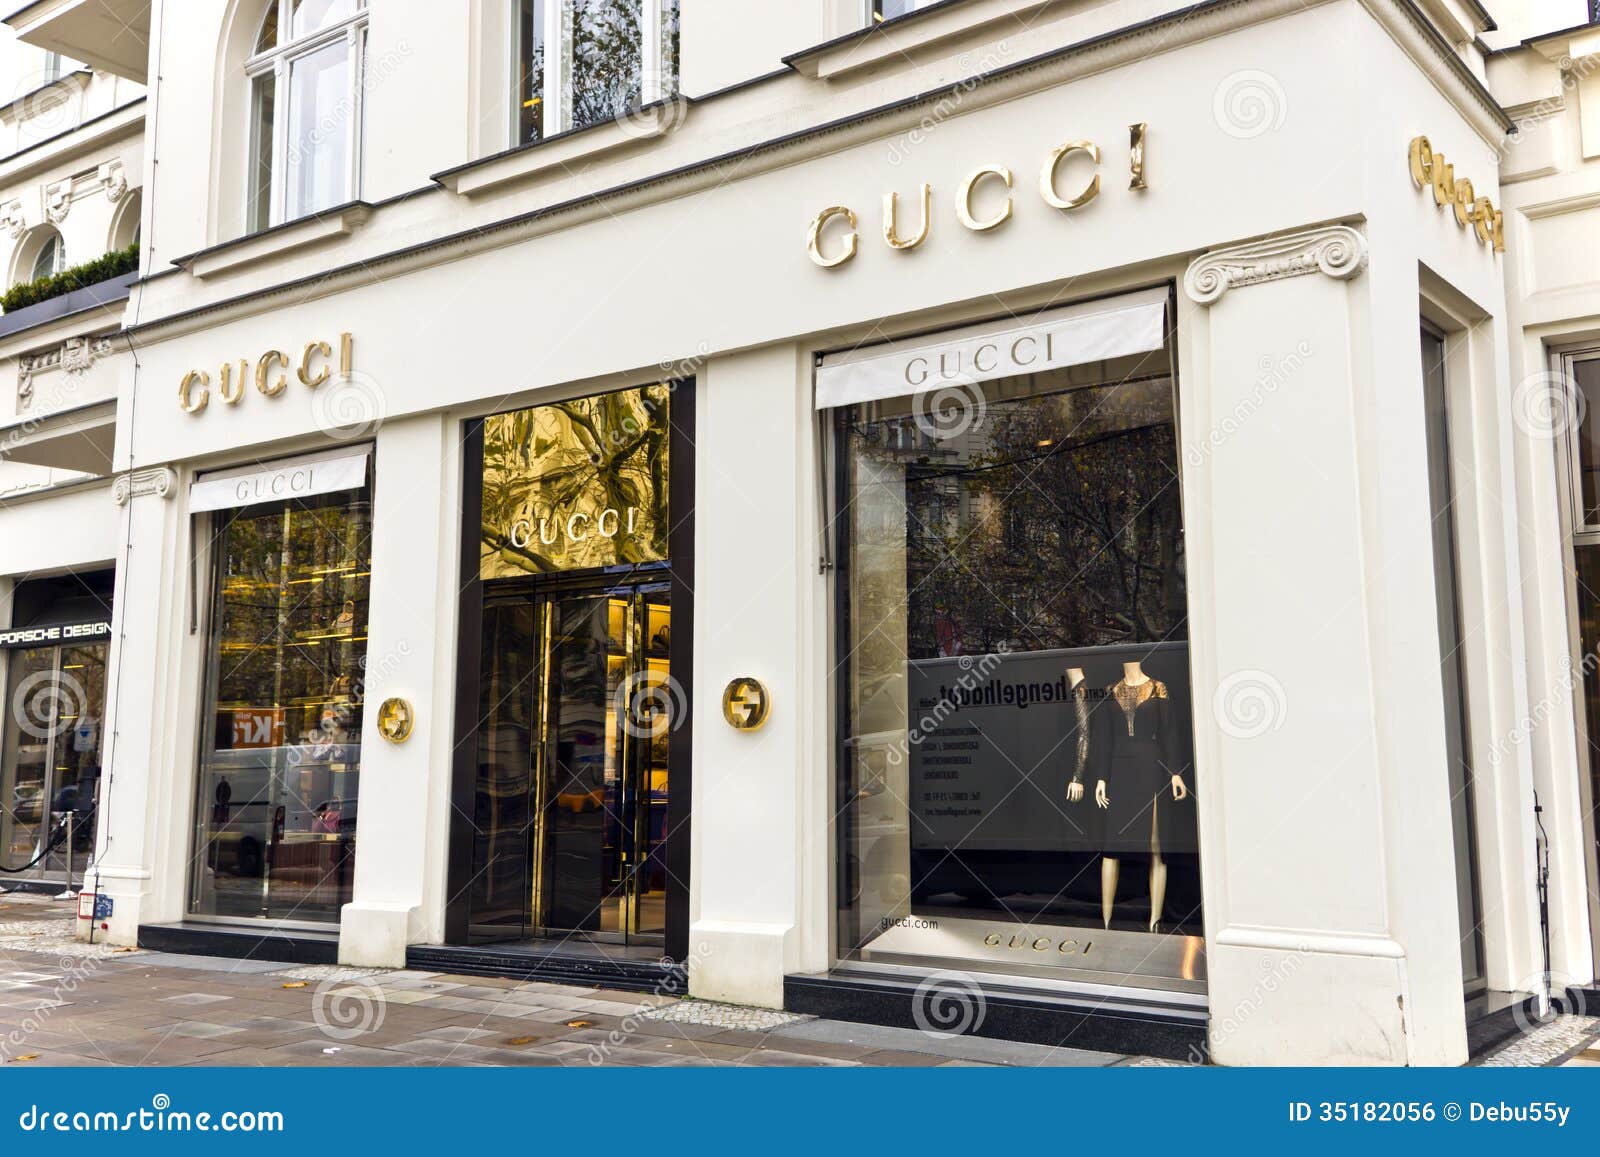 Gucci Store In Berlin, Germany. Editorial Photo - Image: 35182056